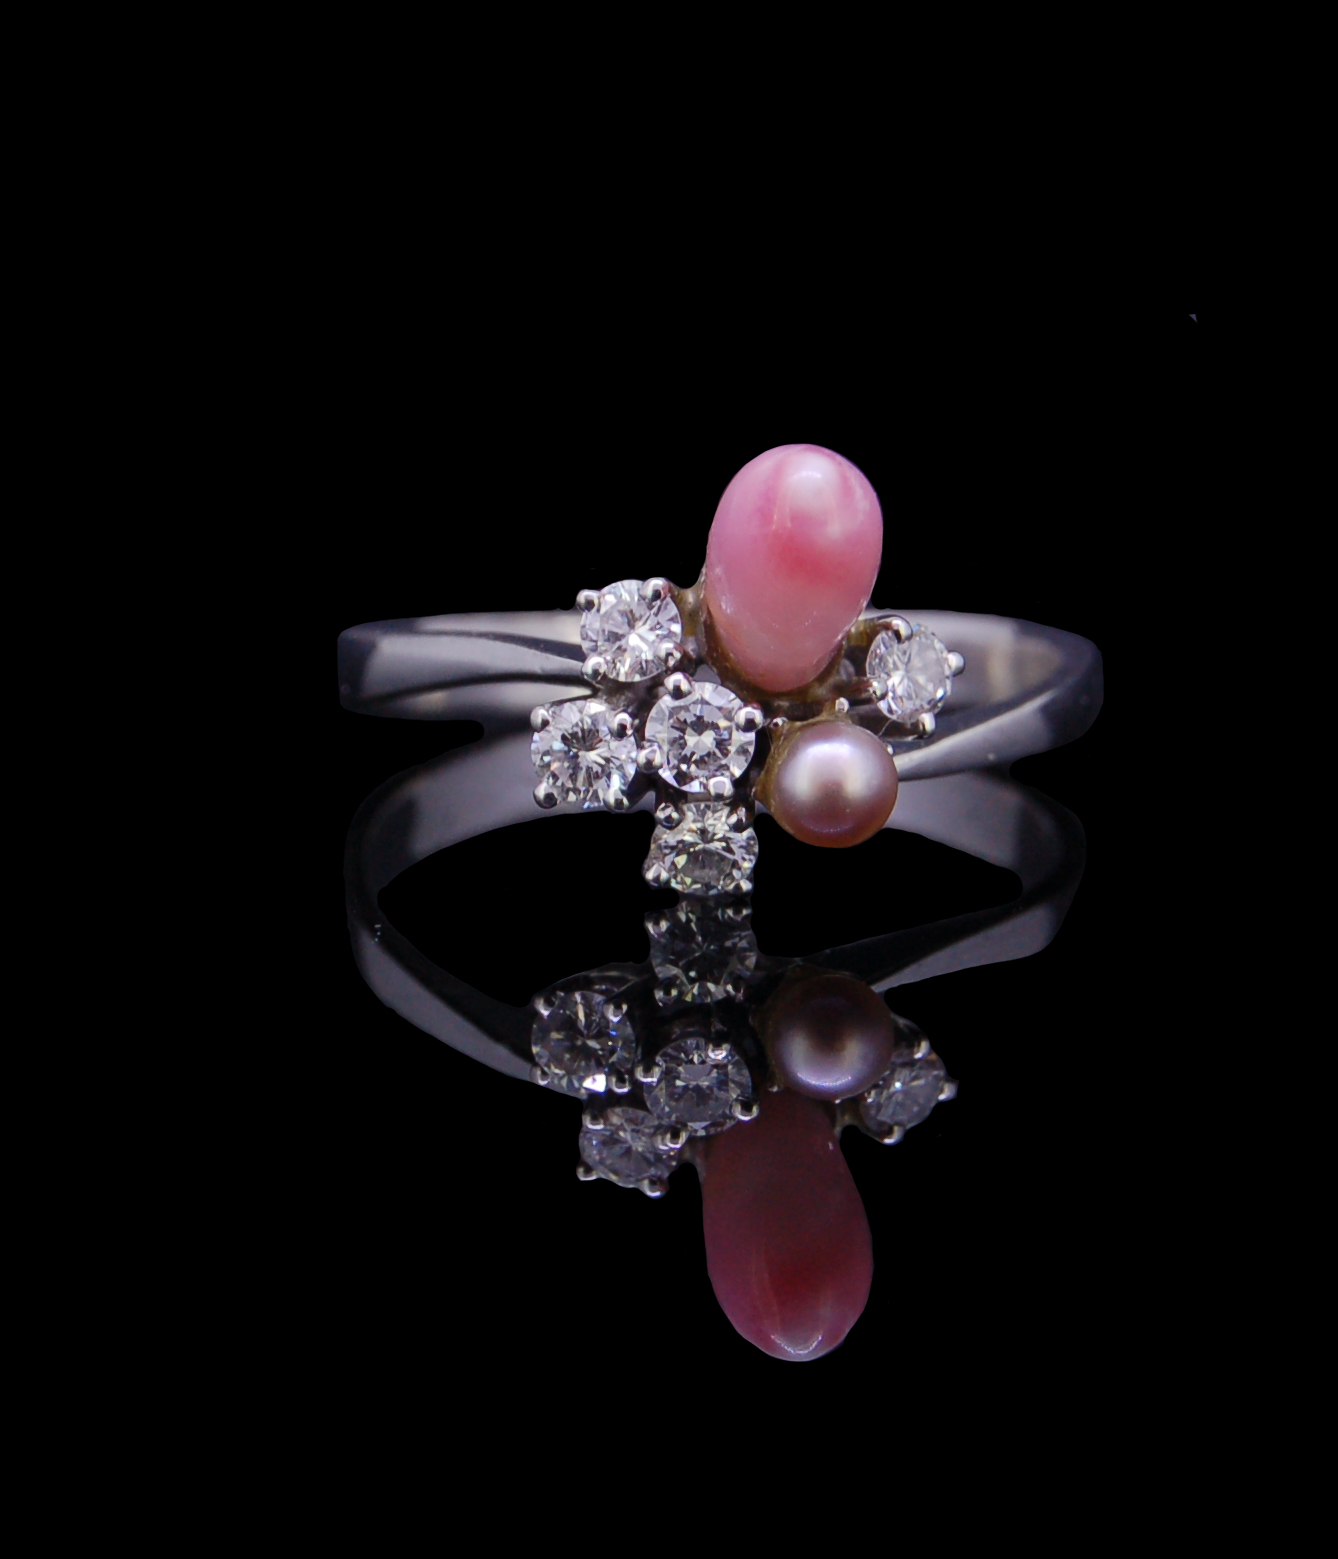 BLACK PEARL, CONCH PEARL AND DIAMOND RING